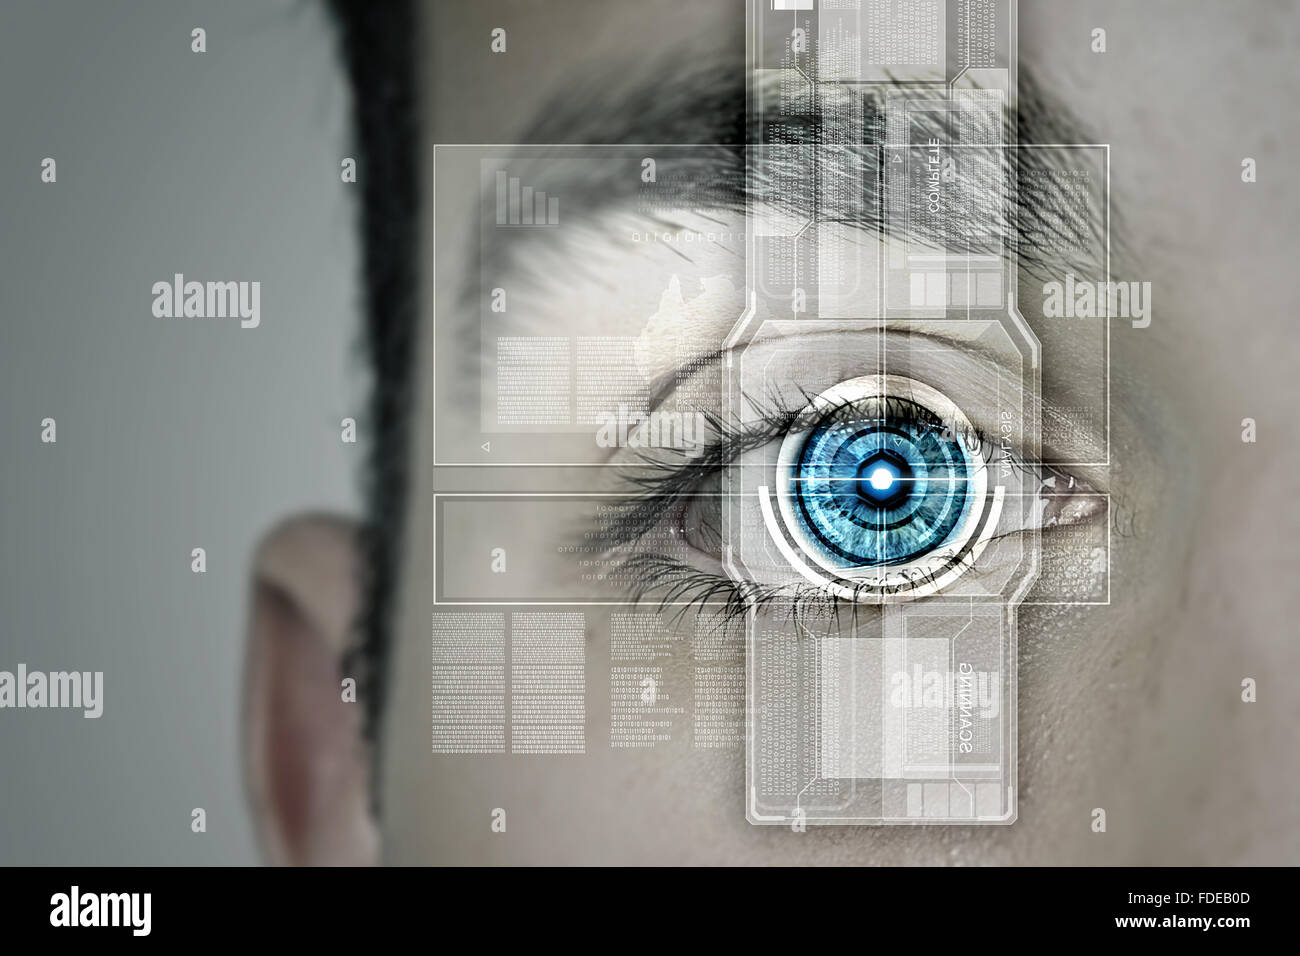 Close up of male eye scanned for recognition Stock Photo